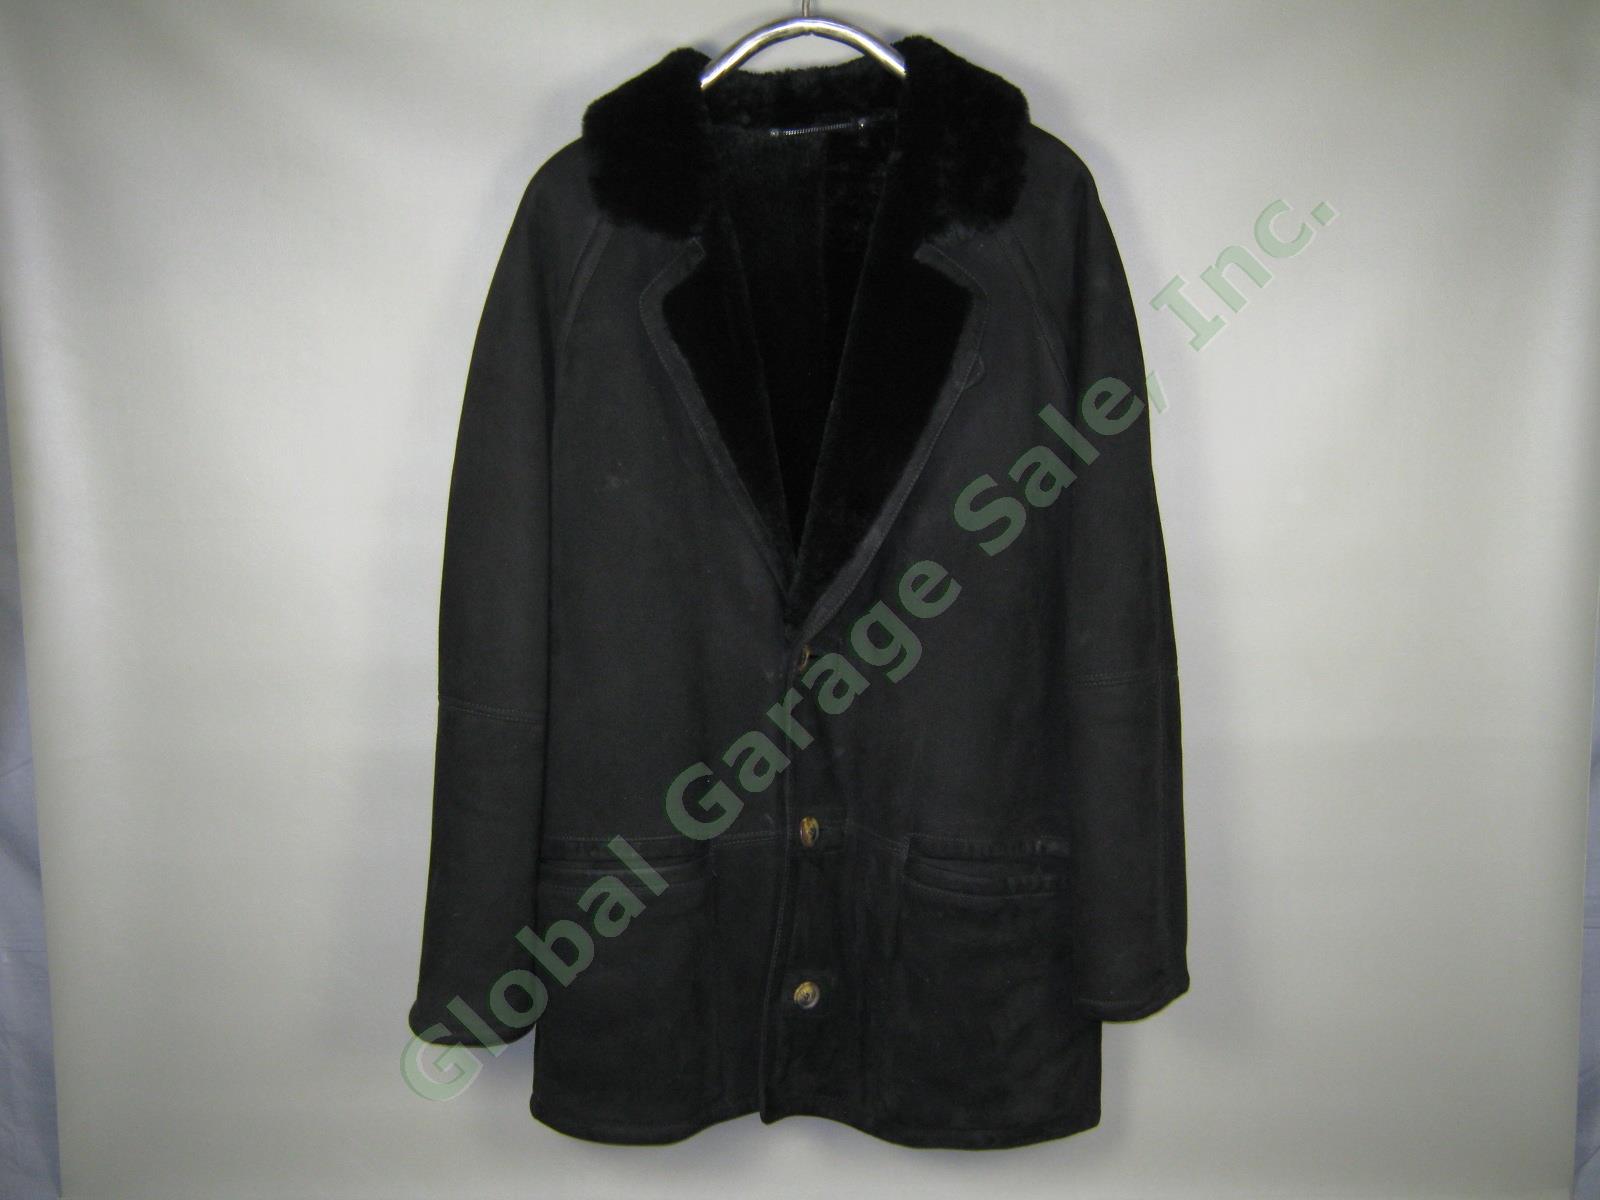 Gorgeous Black Shearling Leather Fur Lamb Wool Coat Made In Italy Mens XL 52 NR!